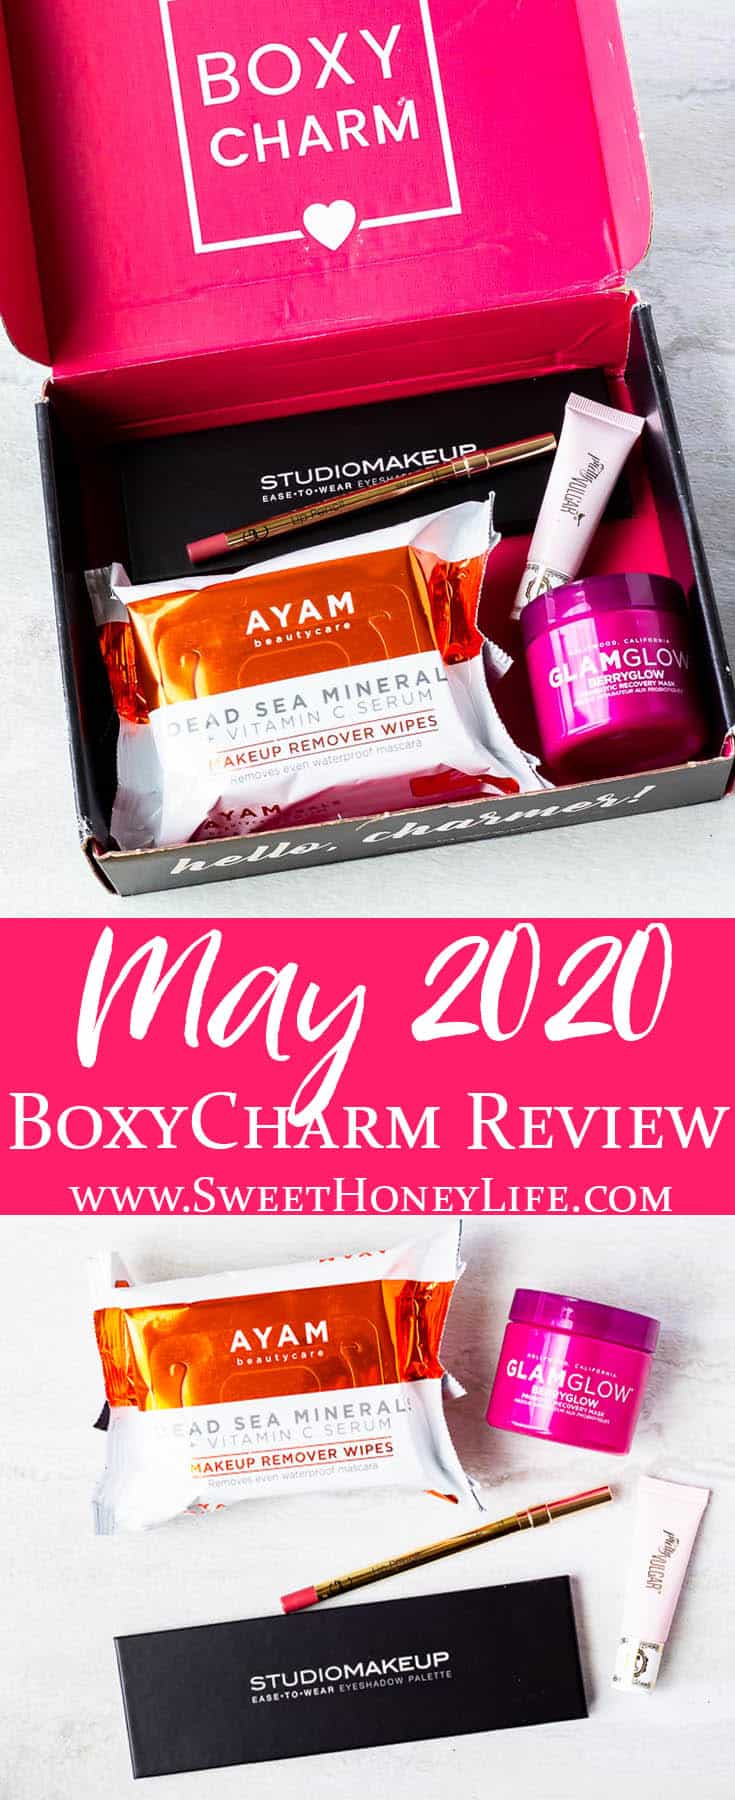 May 2020 Boxycharm Review (an AMAZING first box!) Sweet Honey Life